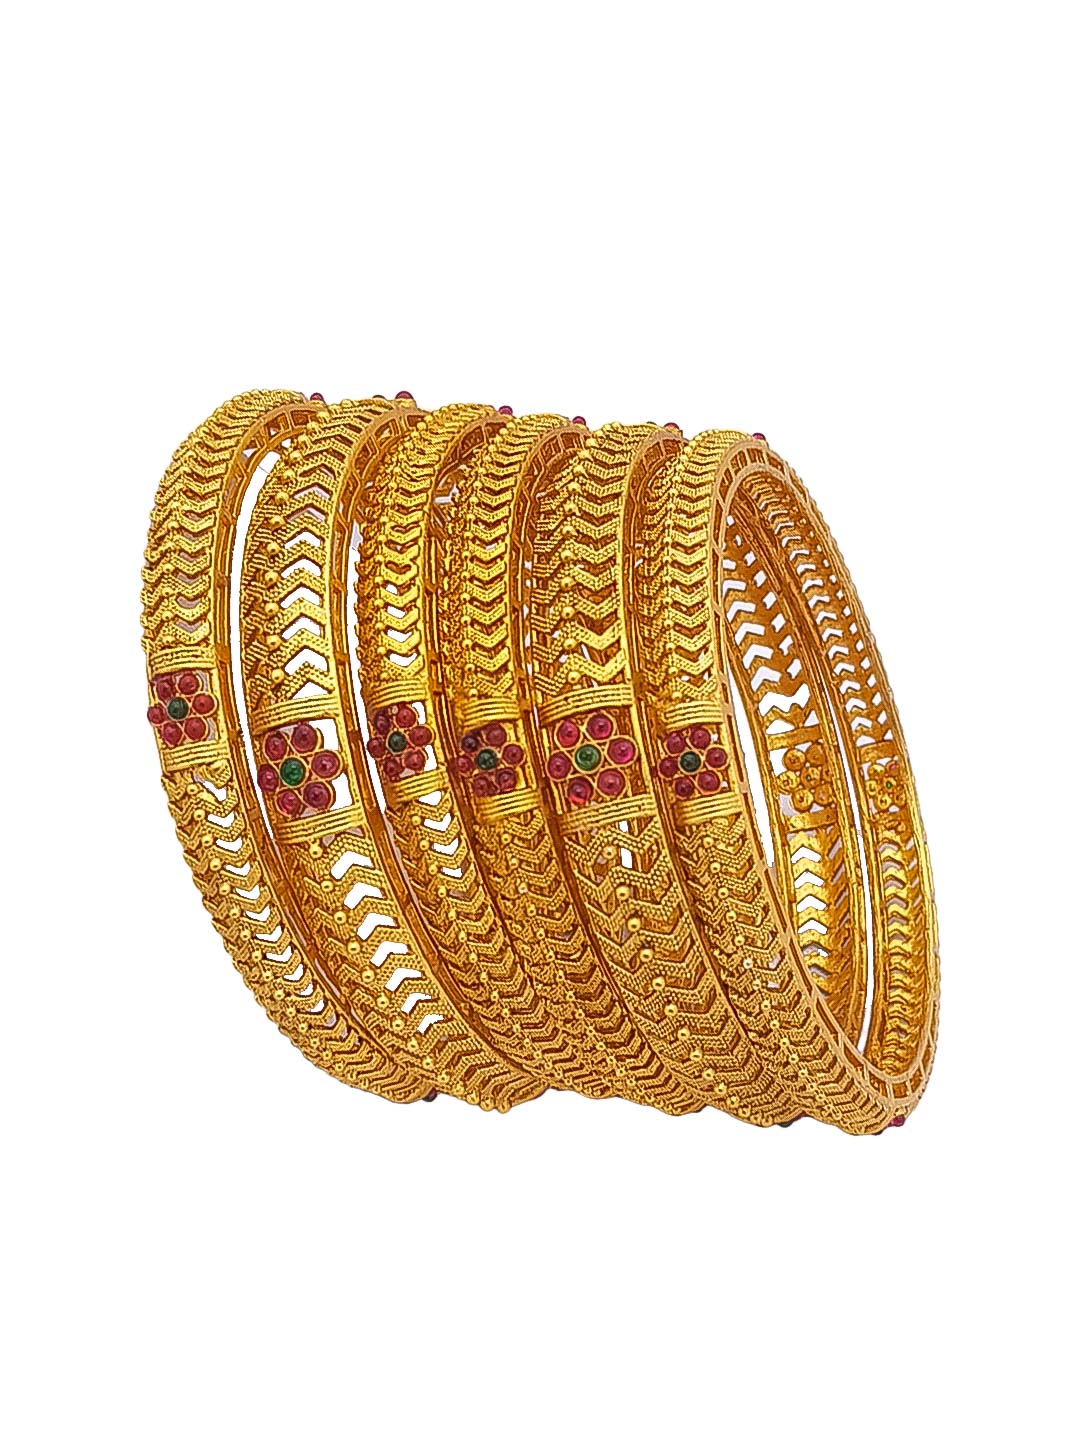 Bangle set of 6 temple collection 17325C